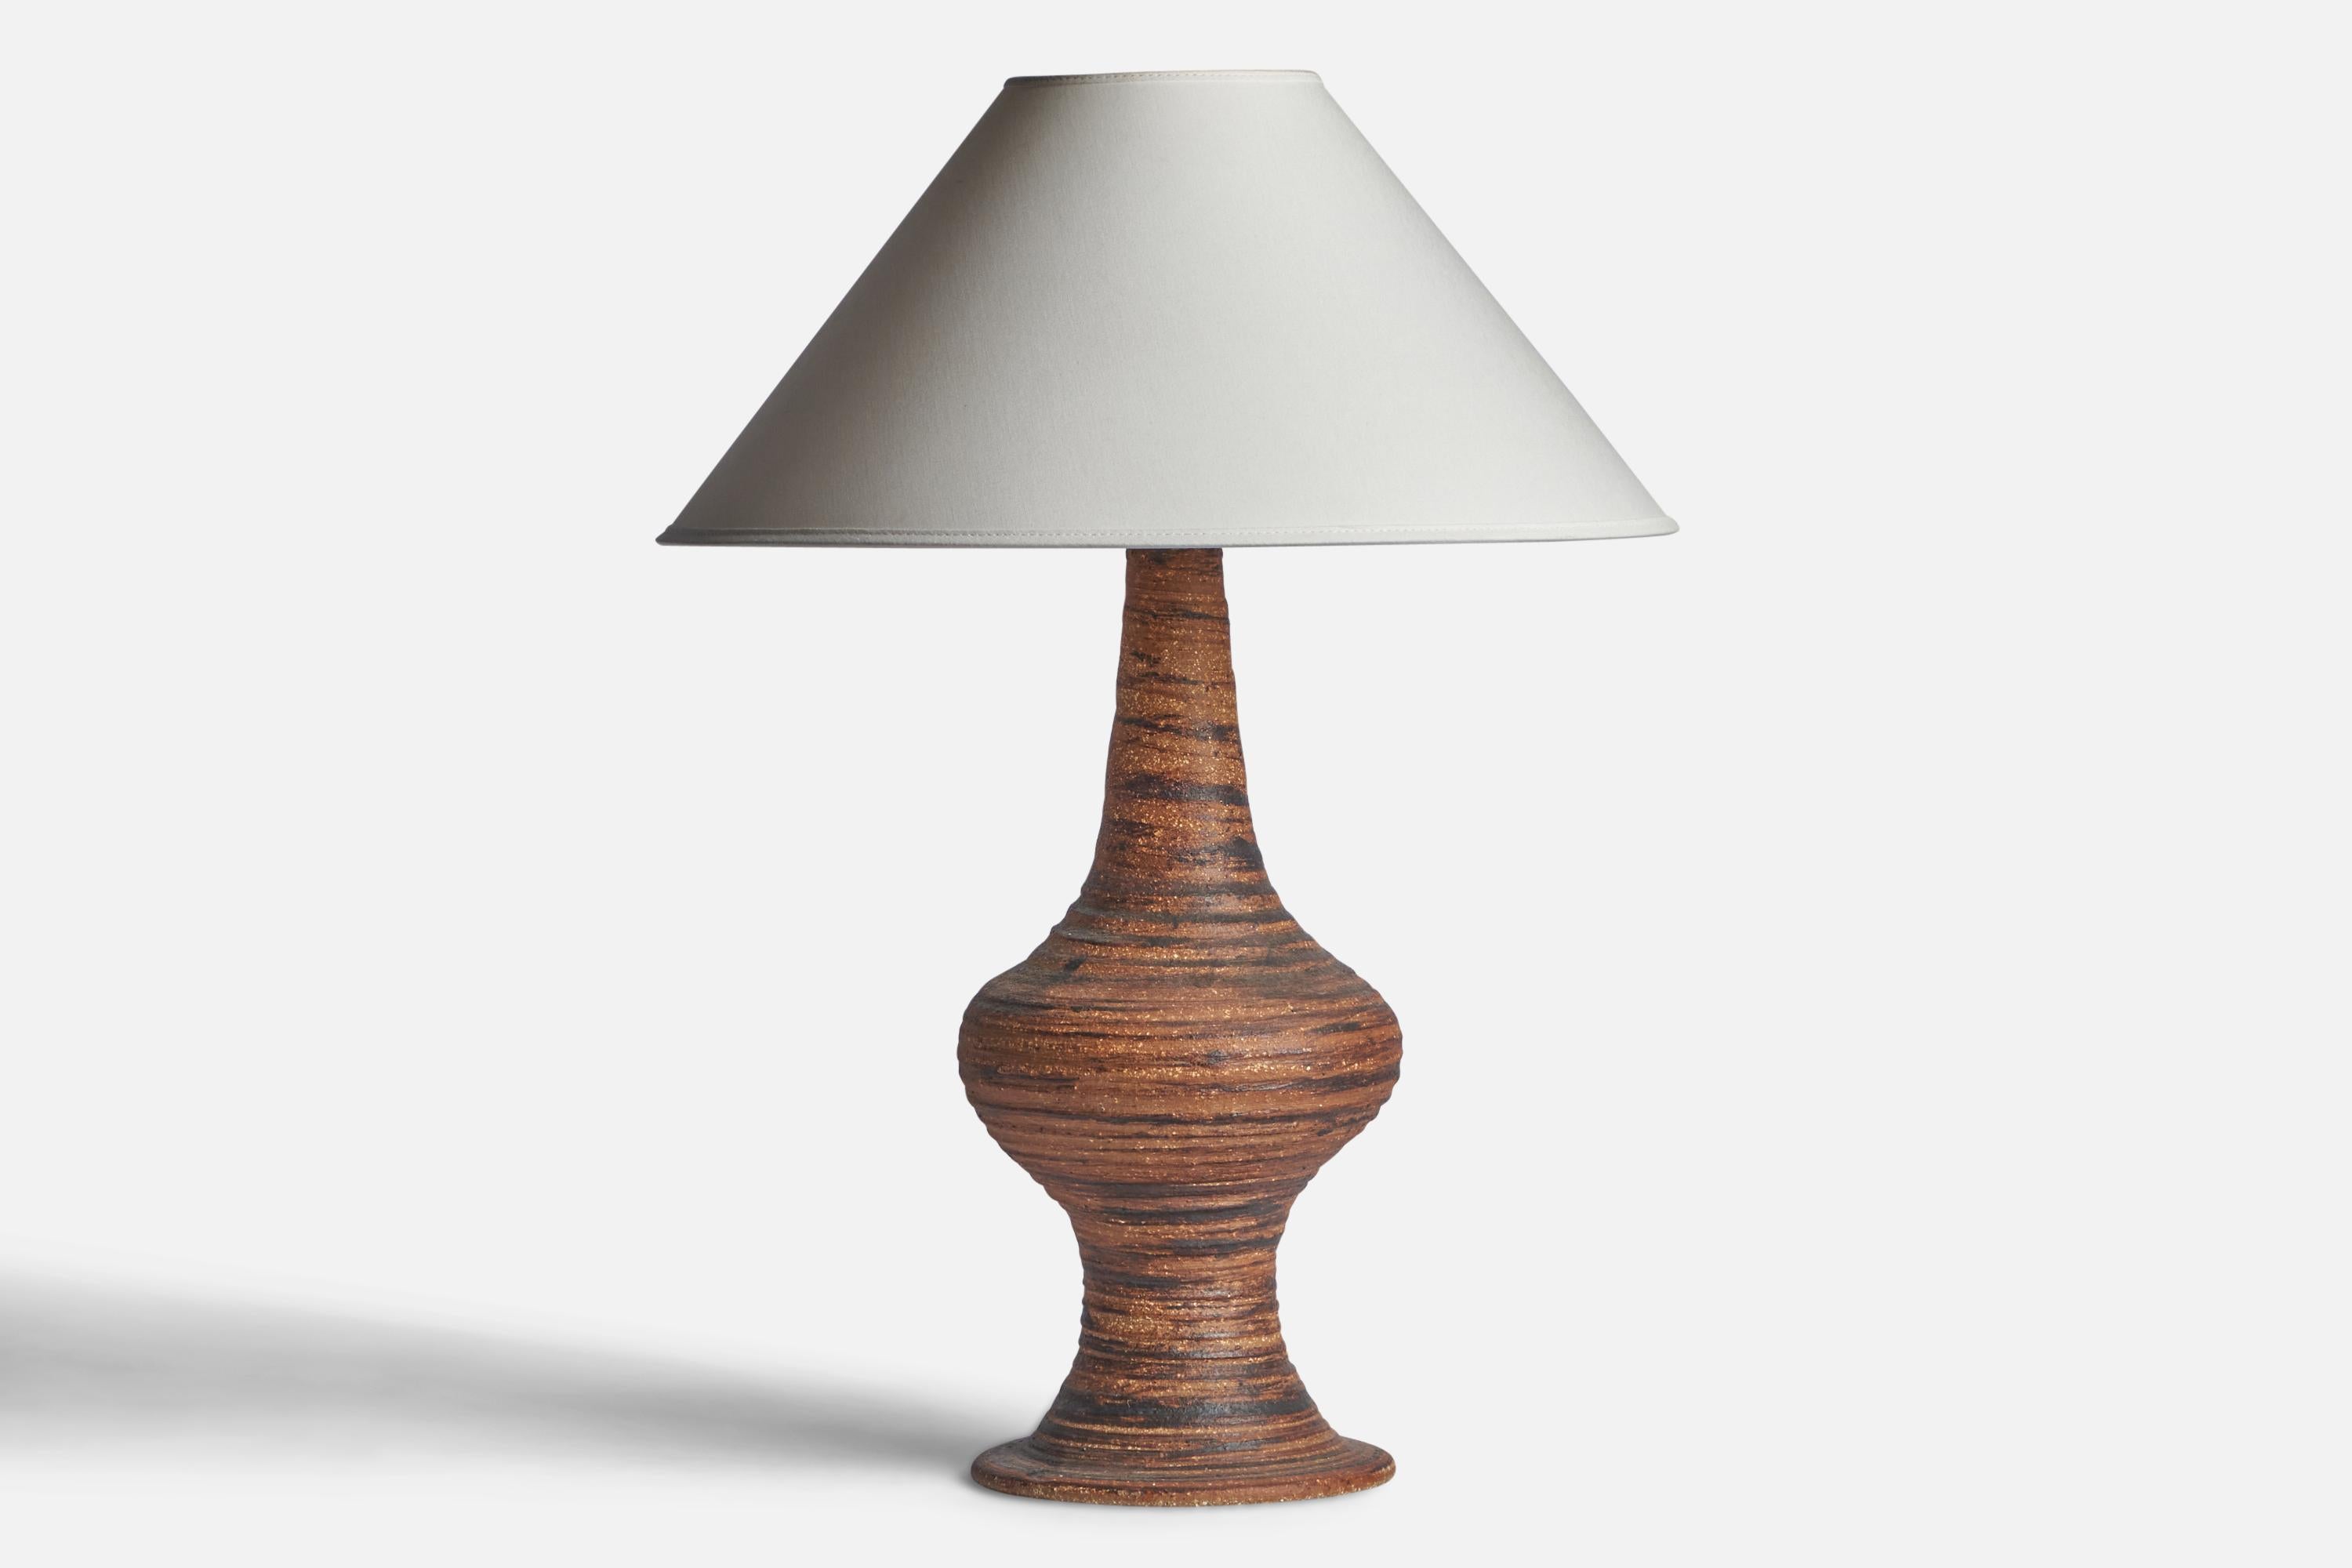 A brown and black-glazed stoneware table lamp designed and produced in Sweden, c. 1960s.

Dimensions of Lamp (inches): 17.5” H x 6.95” Diameter
Dimensions of Shade (inches): 4.5” Top Diameter x 16” Bottom Diameter x 7.25” H
Dimensions of Lamp with